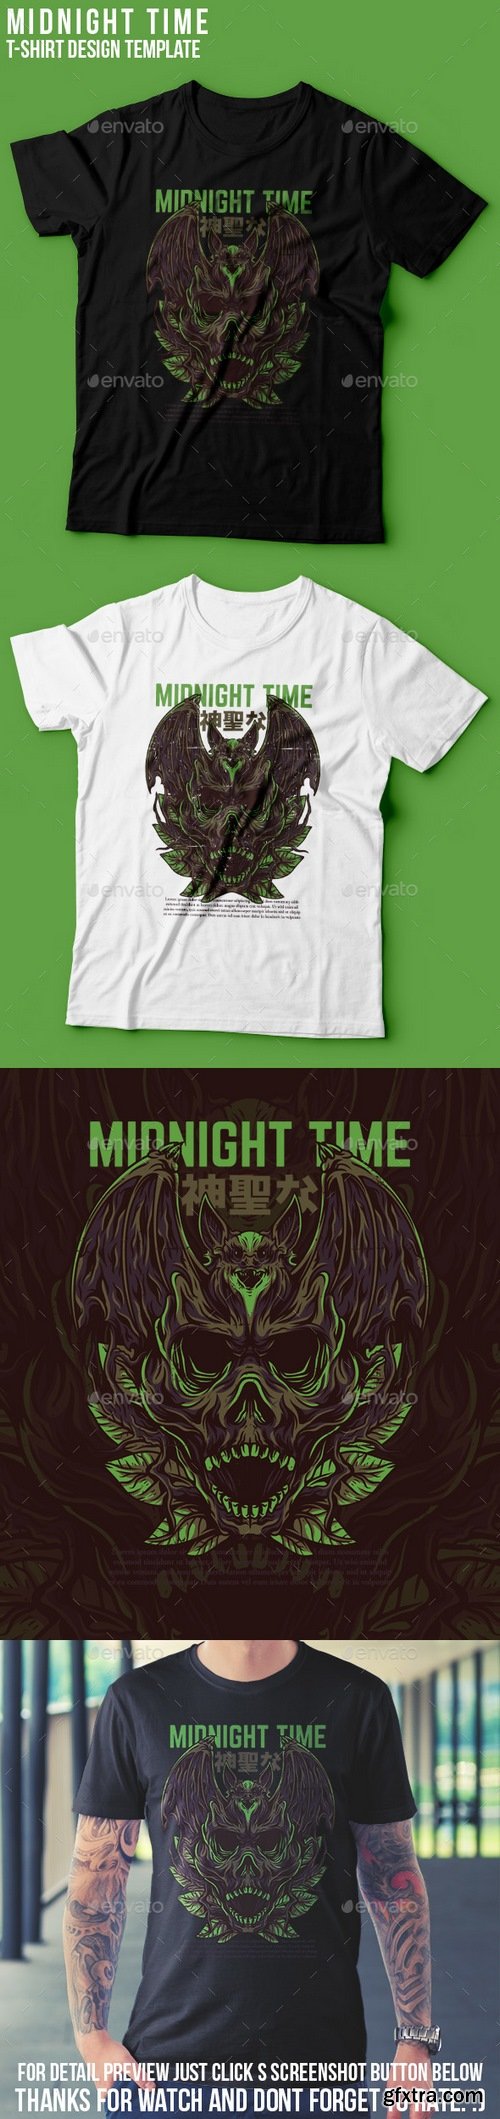 Graphicriver - Midnight Time T-Shirt Design 22801479